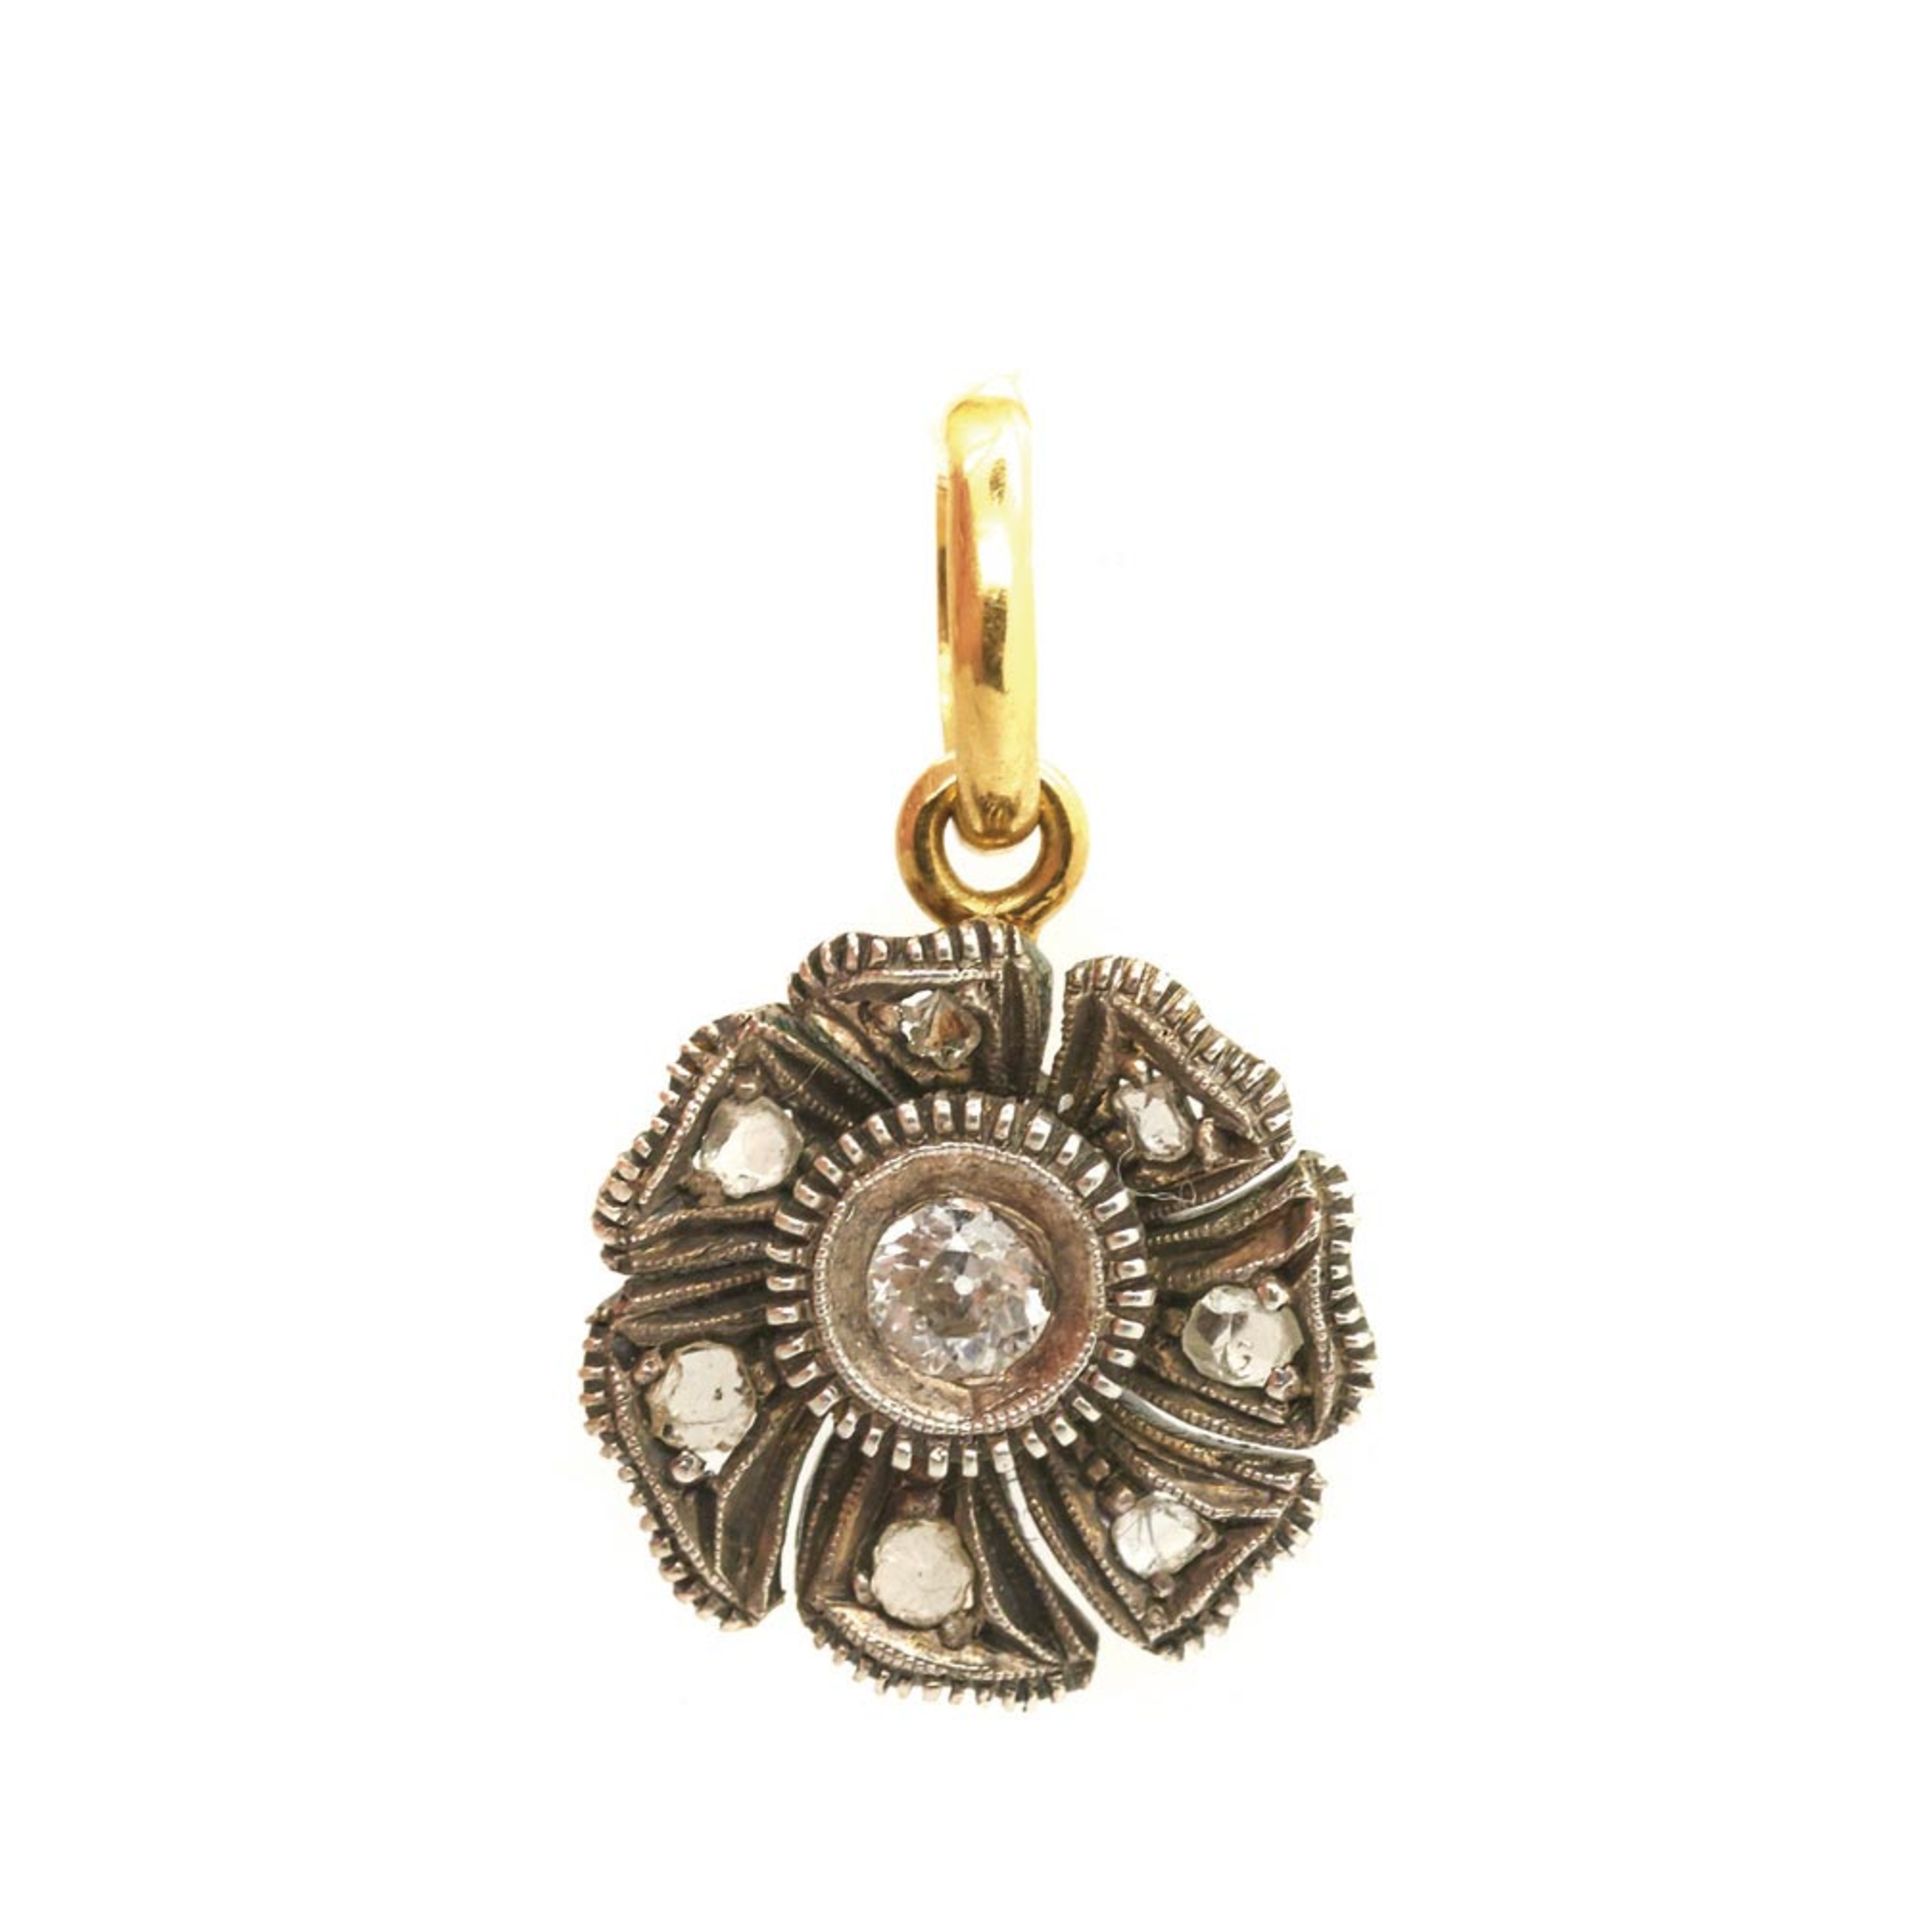 Isabelline silver, gold plated silver and diamonds pendant 19th century